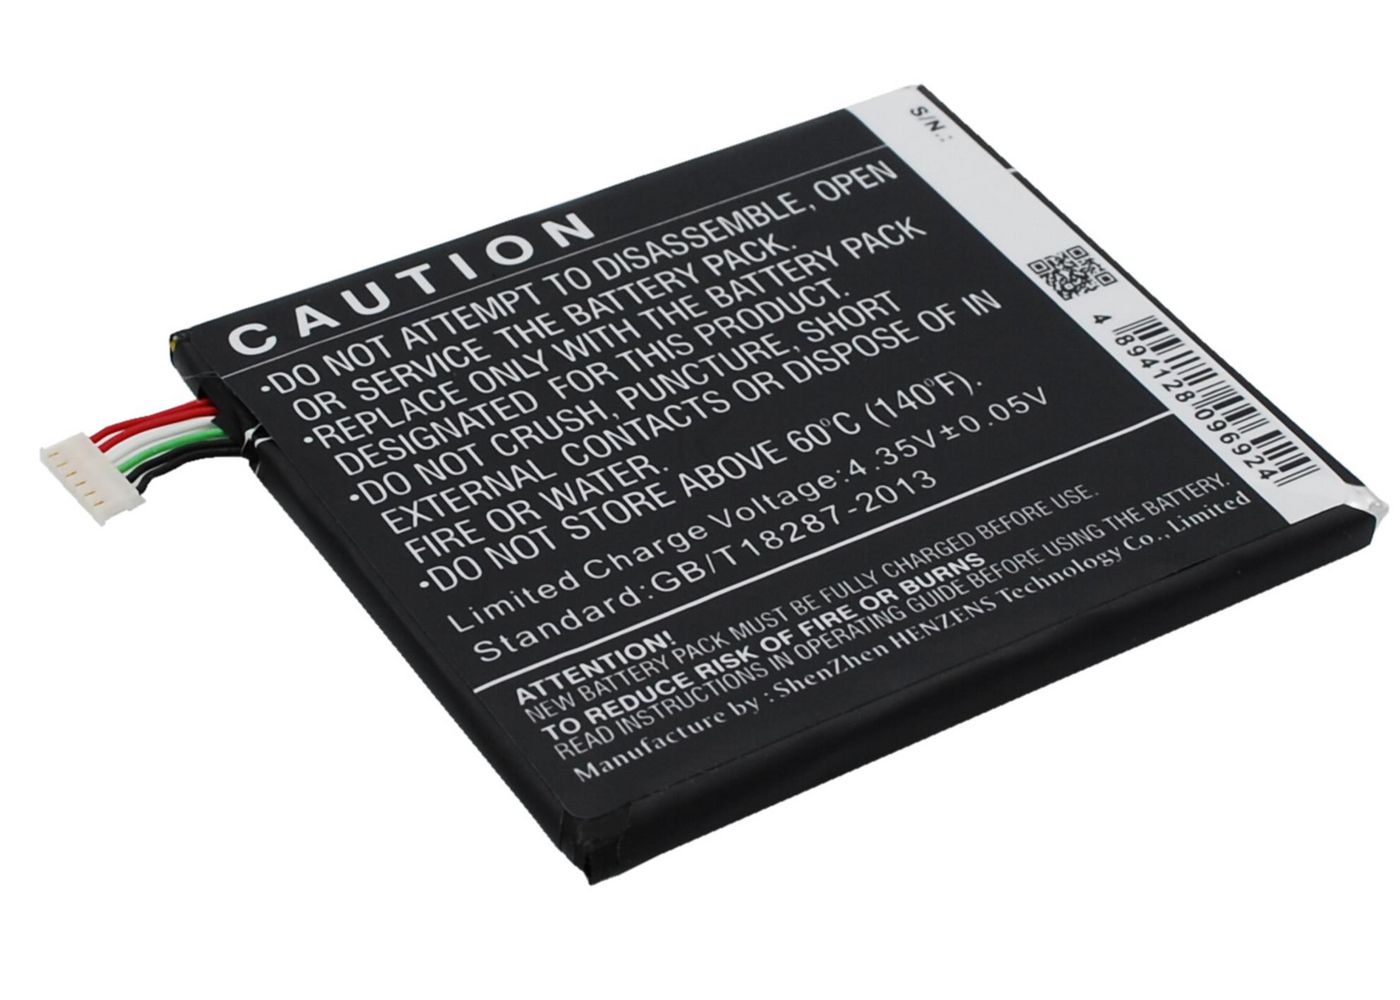 CoreParts MOBX-BAT-HTD610XL Battery for HTC Mobile 